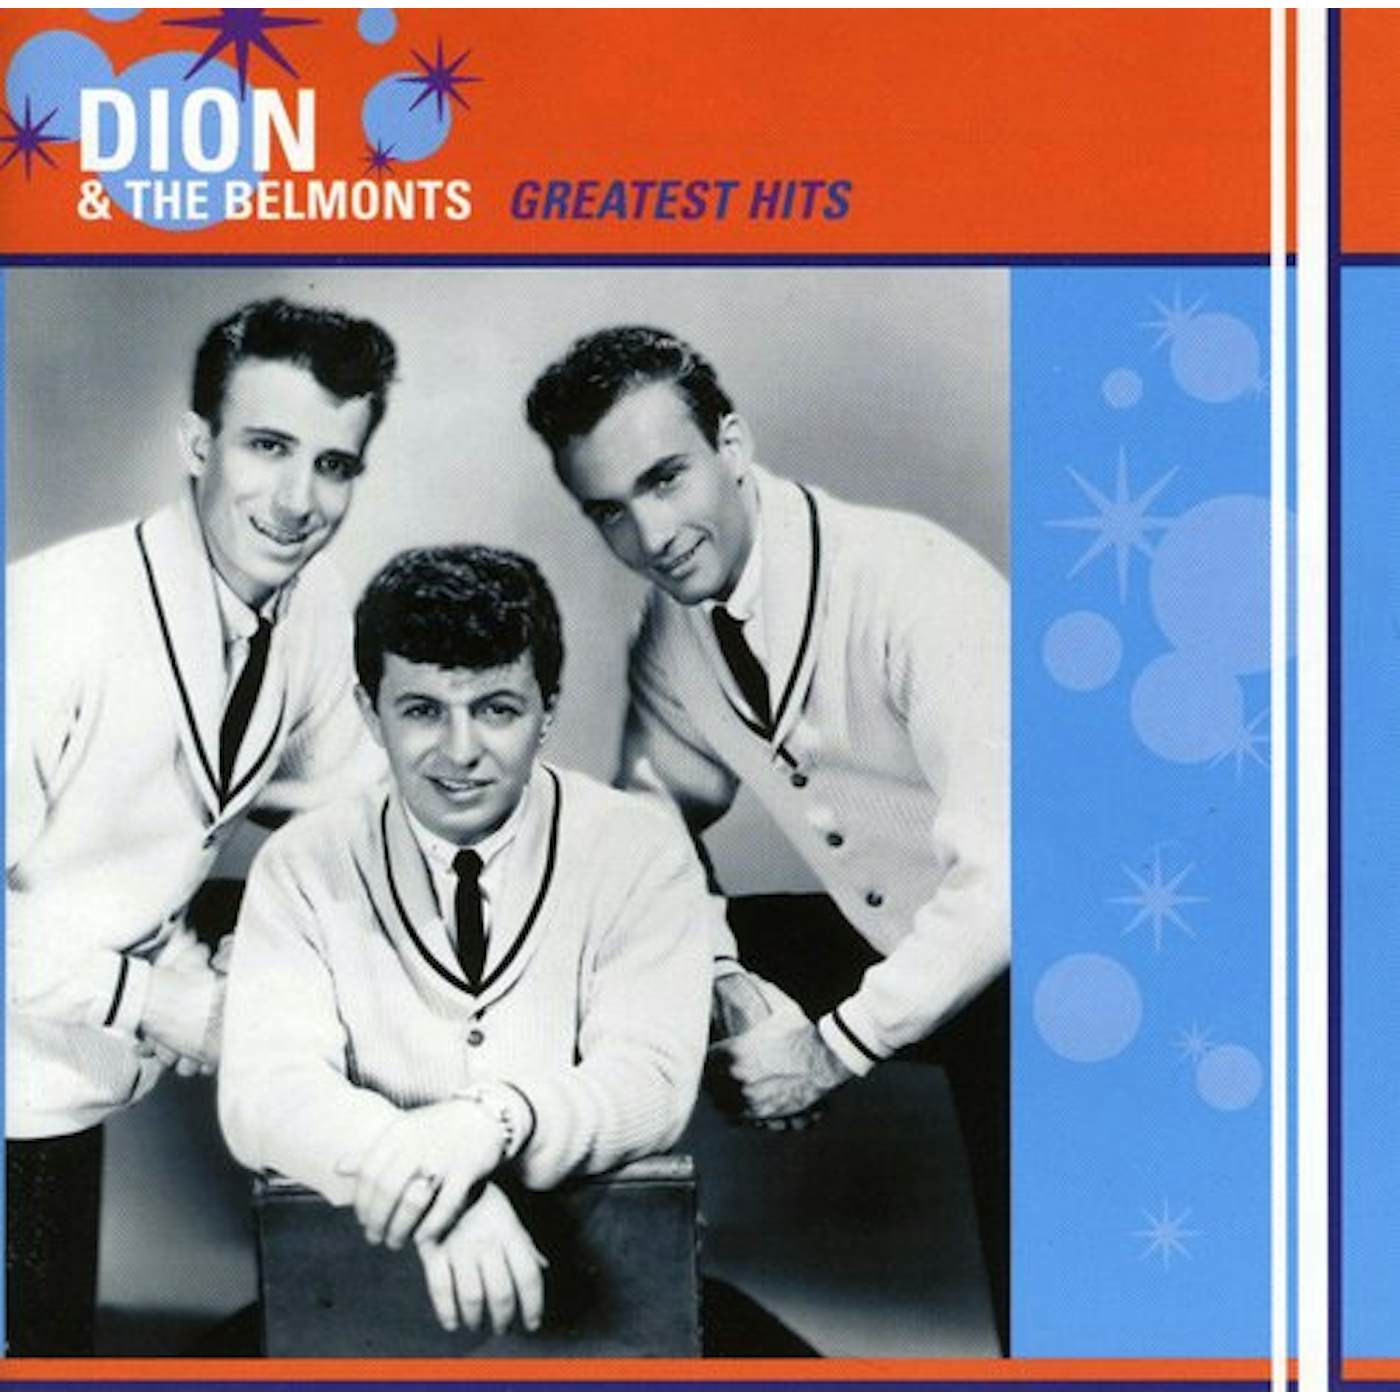 Dion & The Belmonts GREATEST HITS CD